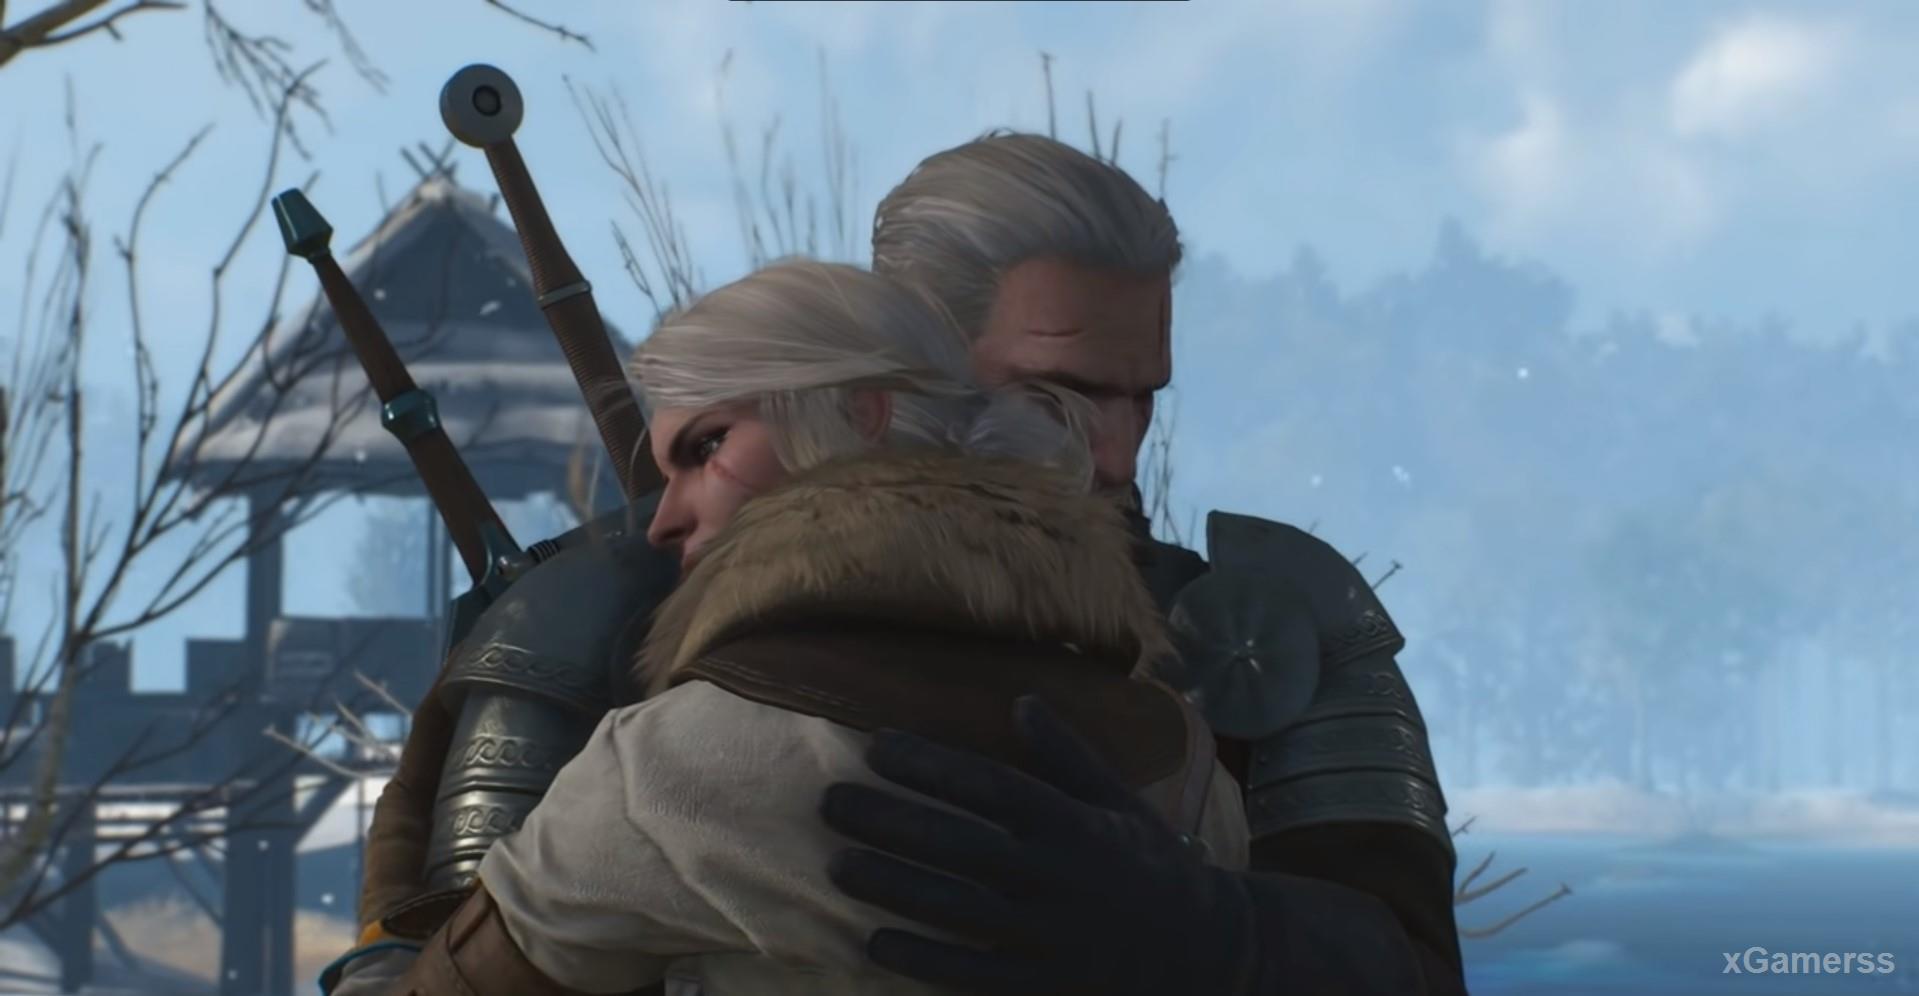 The decisions made by Geralt will leave only good memories for Сiri